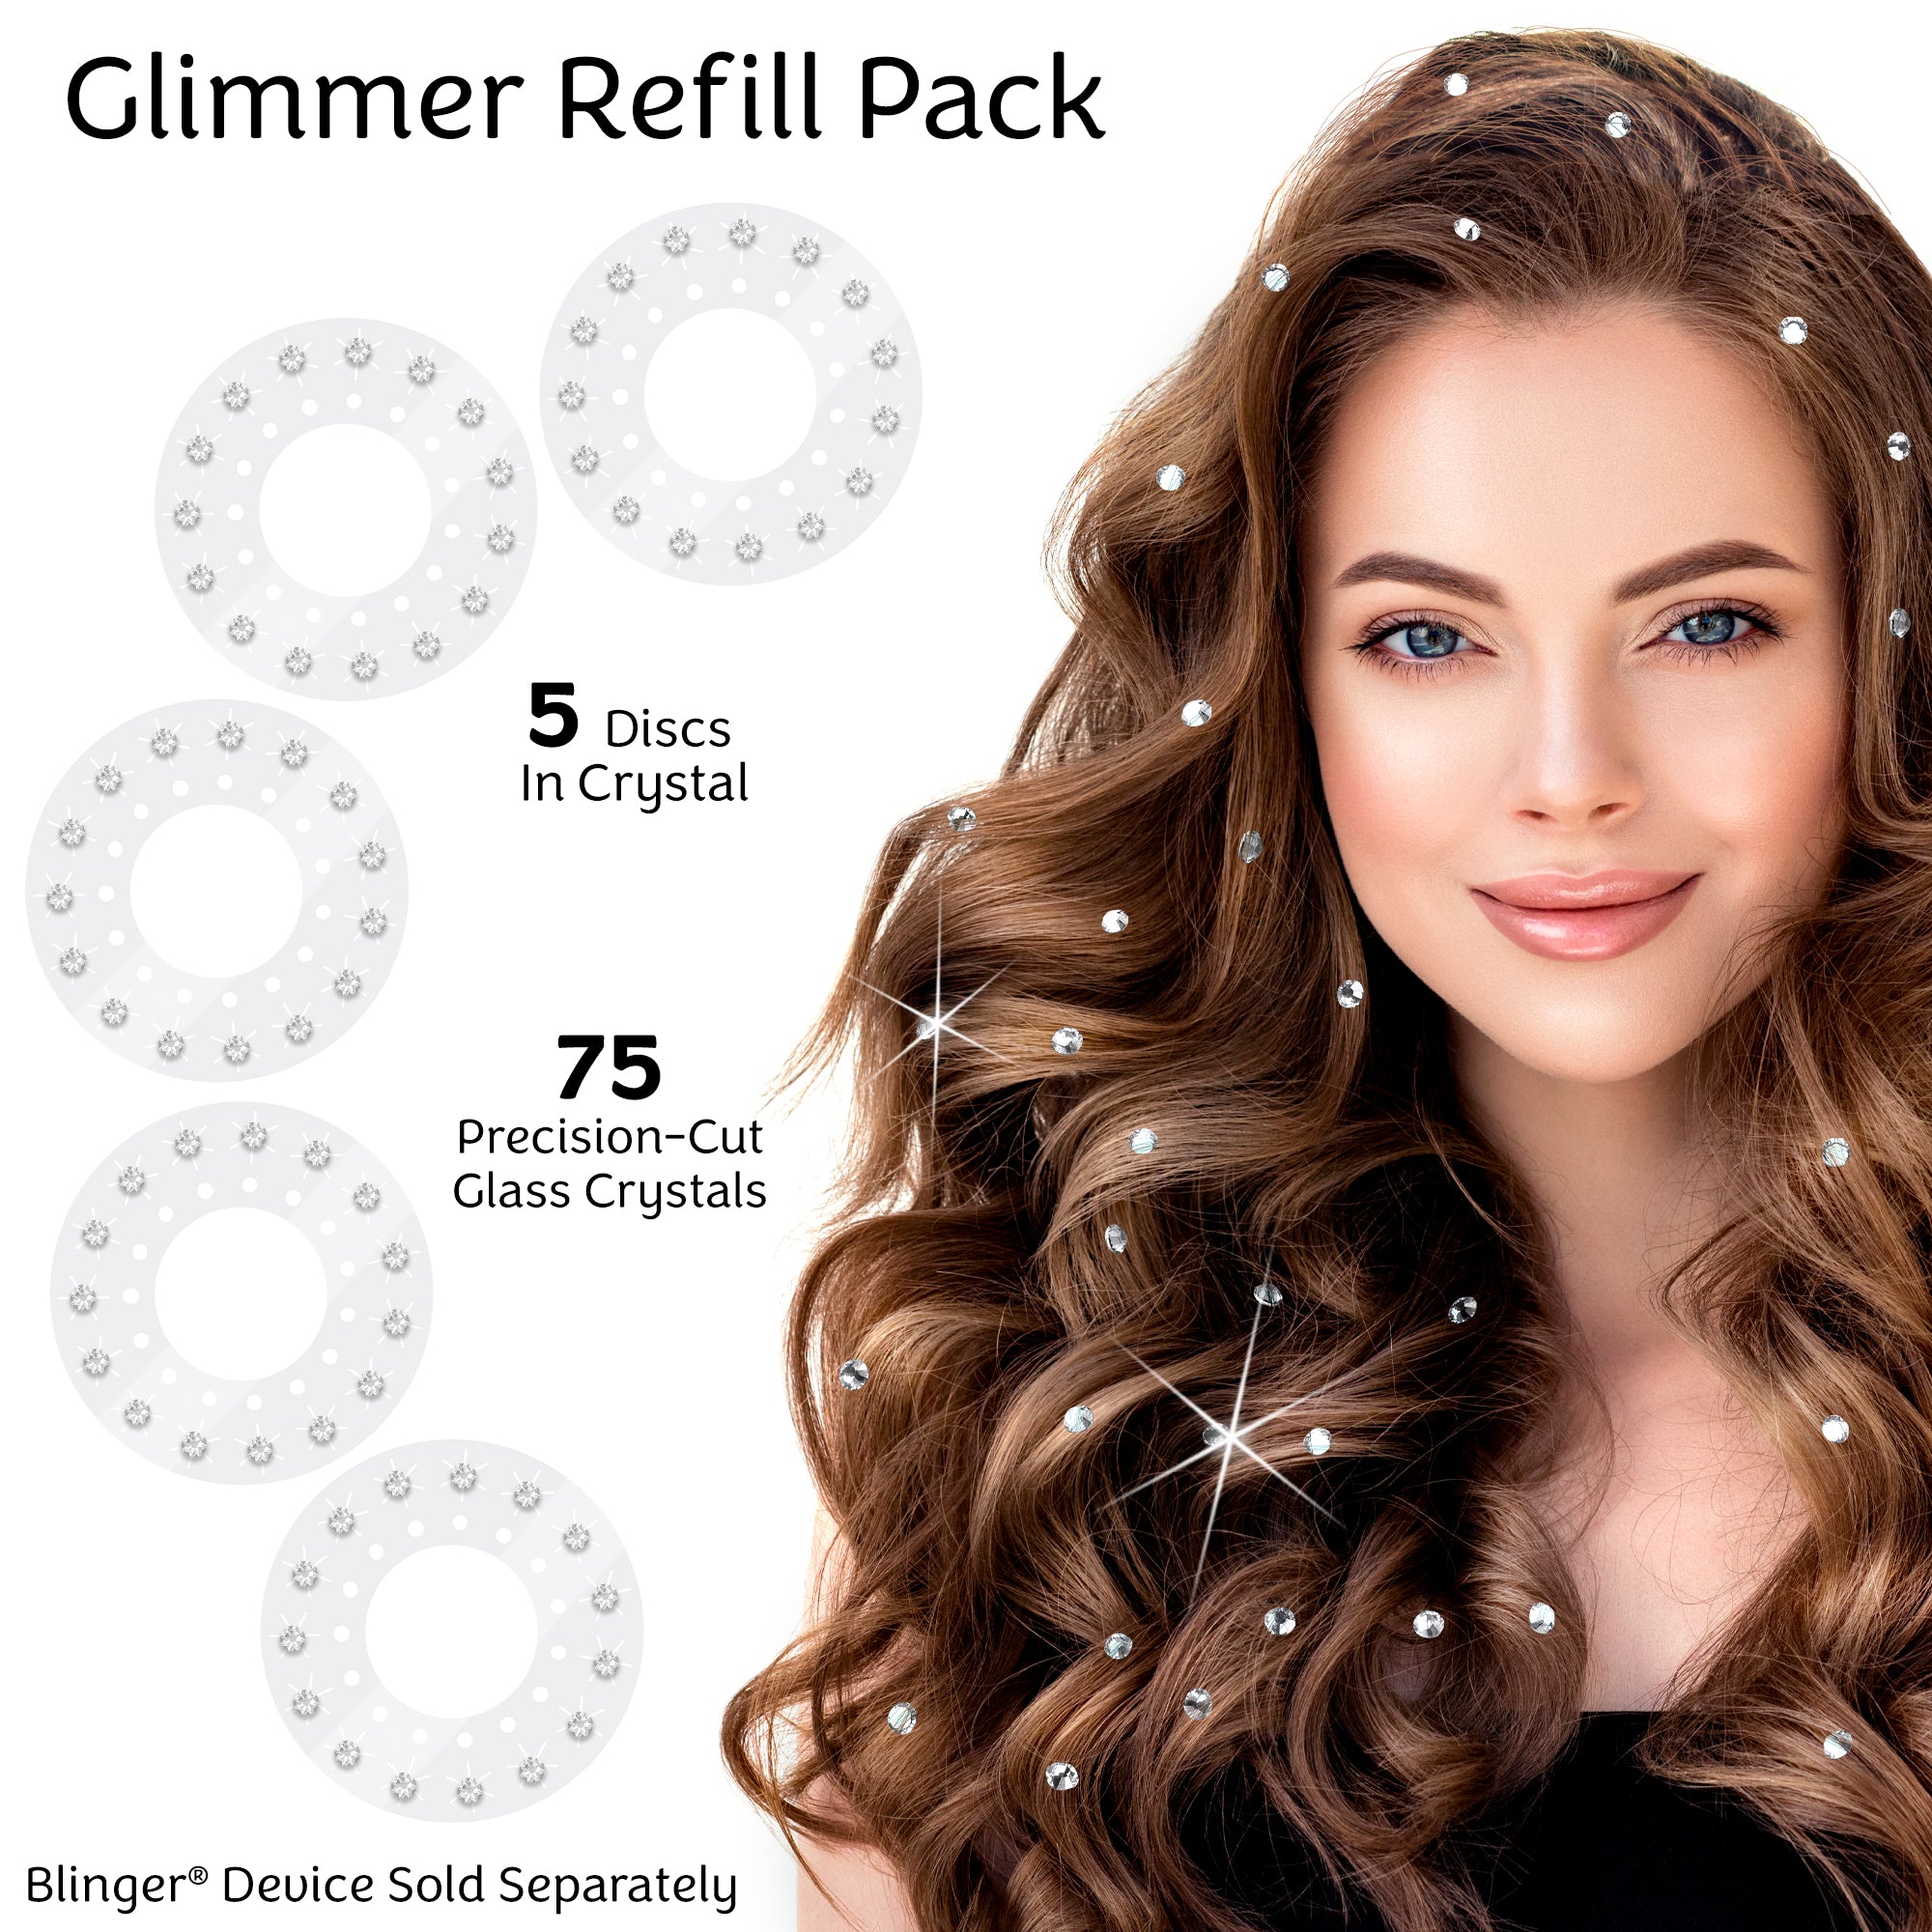 Deluxe Crystal Refill Packs | with 75 Deluxe Crystals